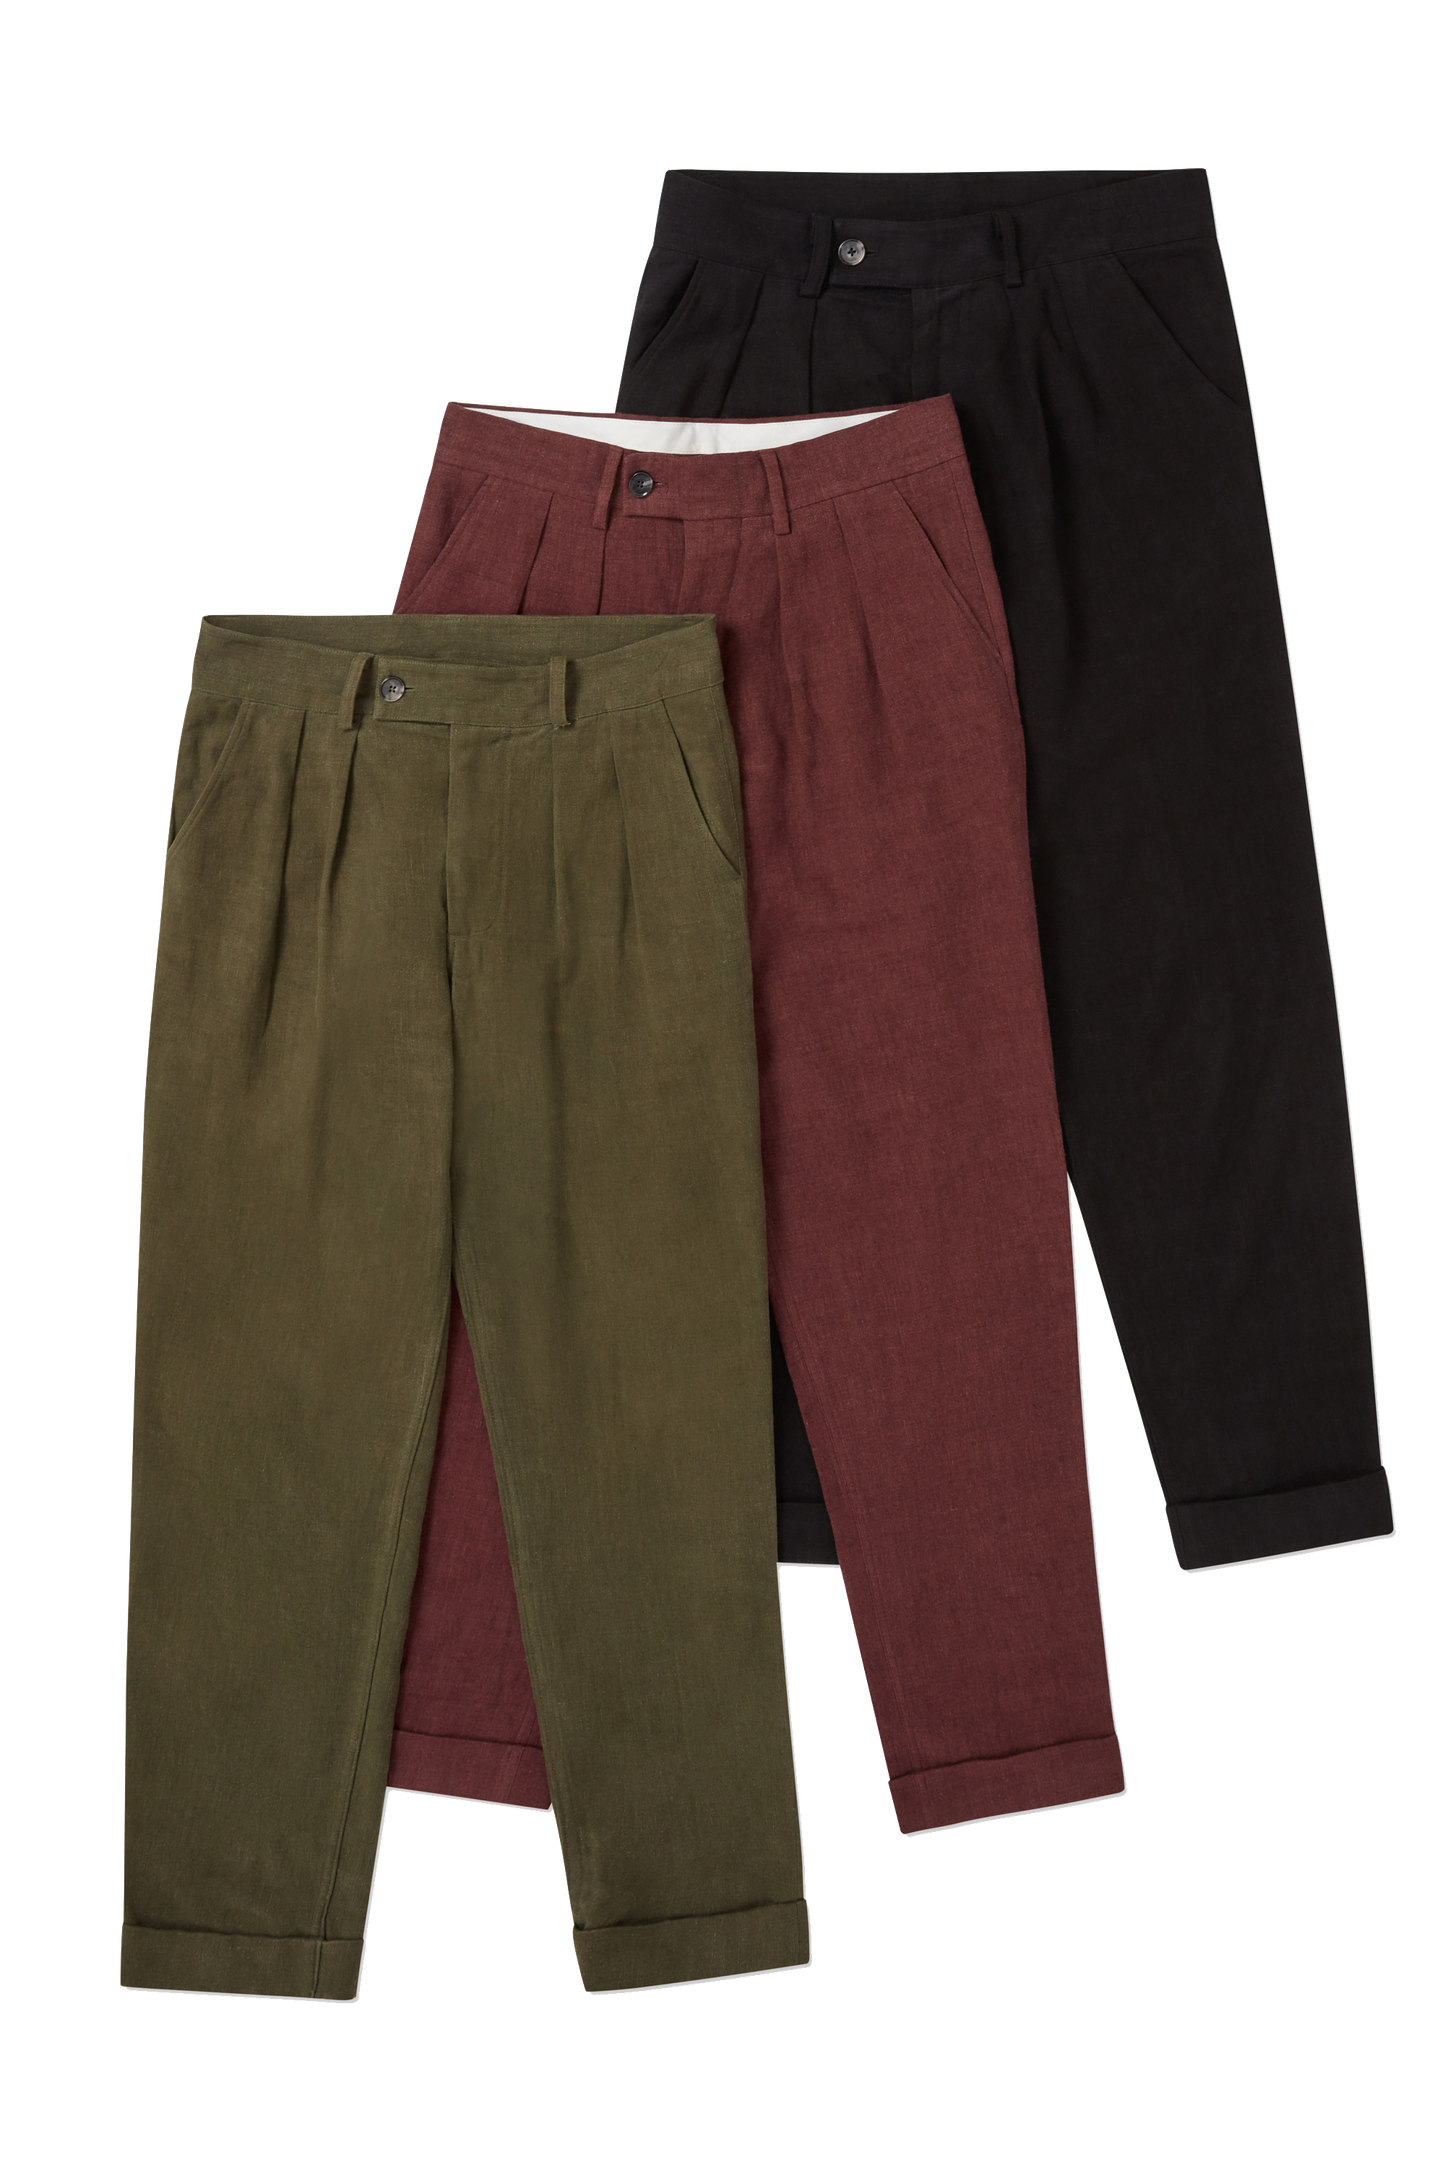 Linen Wool Double Pleated Trousers Oxide Red